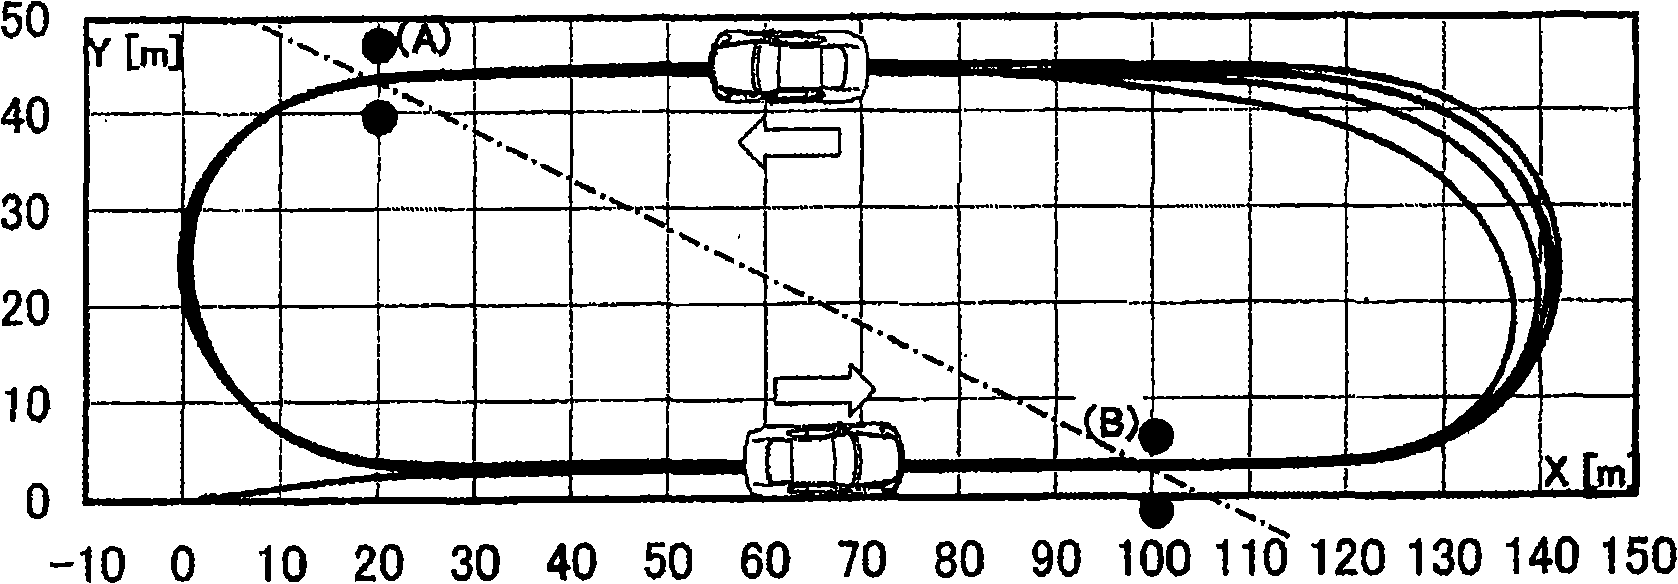 Vehicle speed control apparatus in accordance with curvature of vehicle trajectory